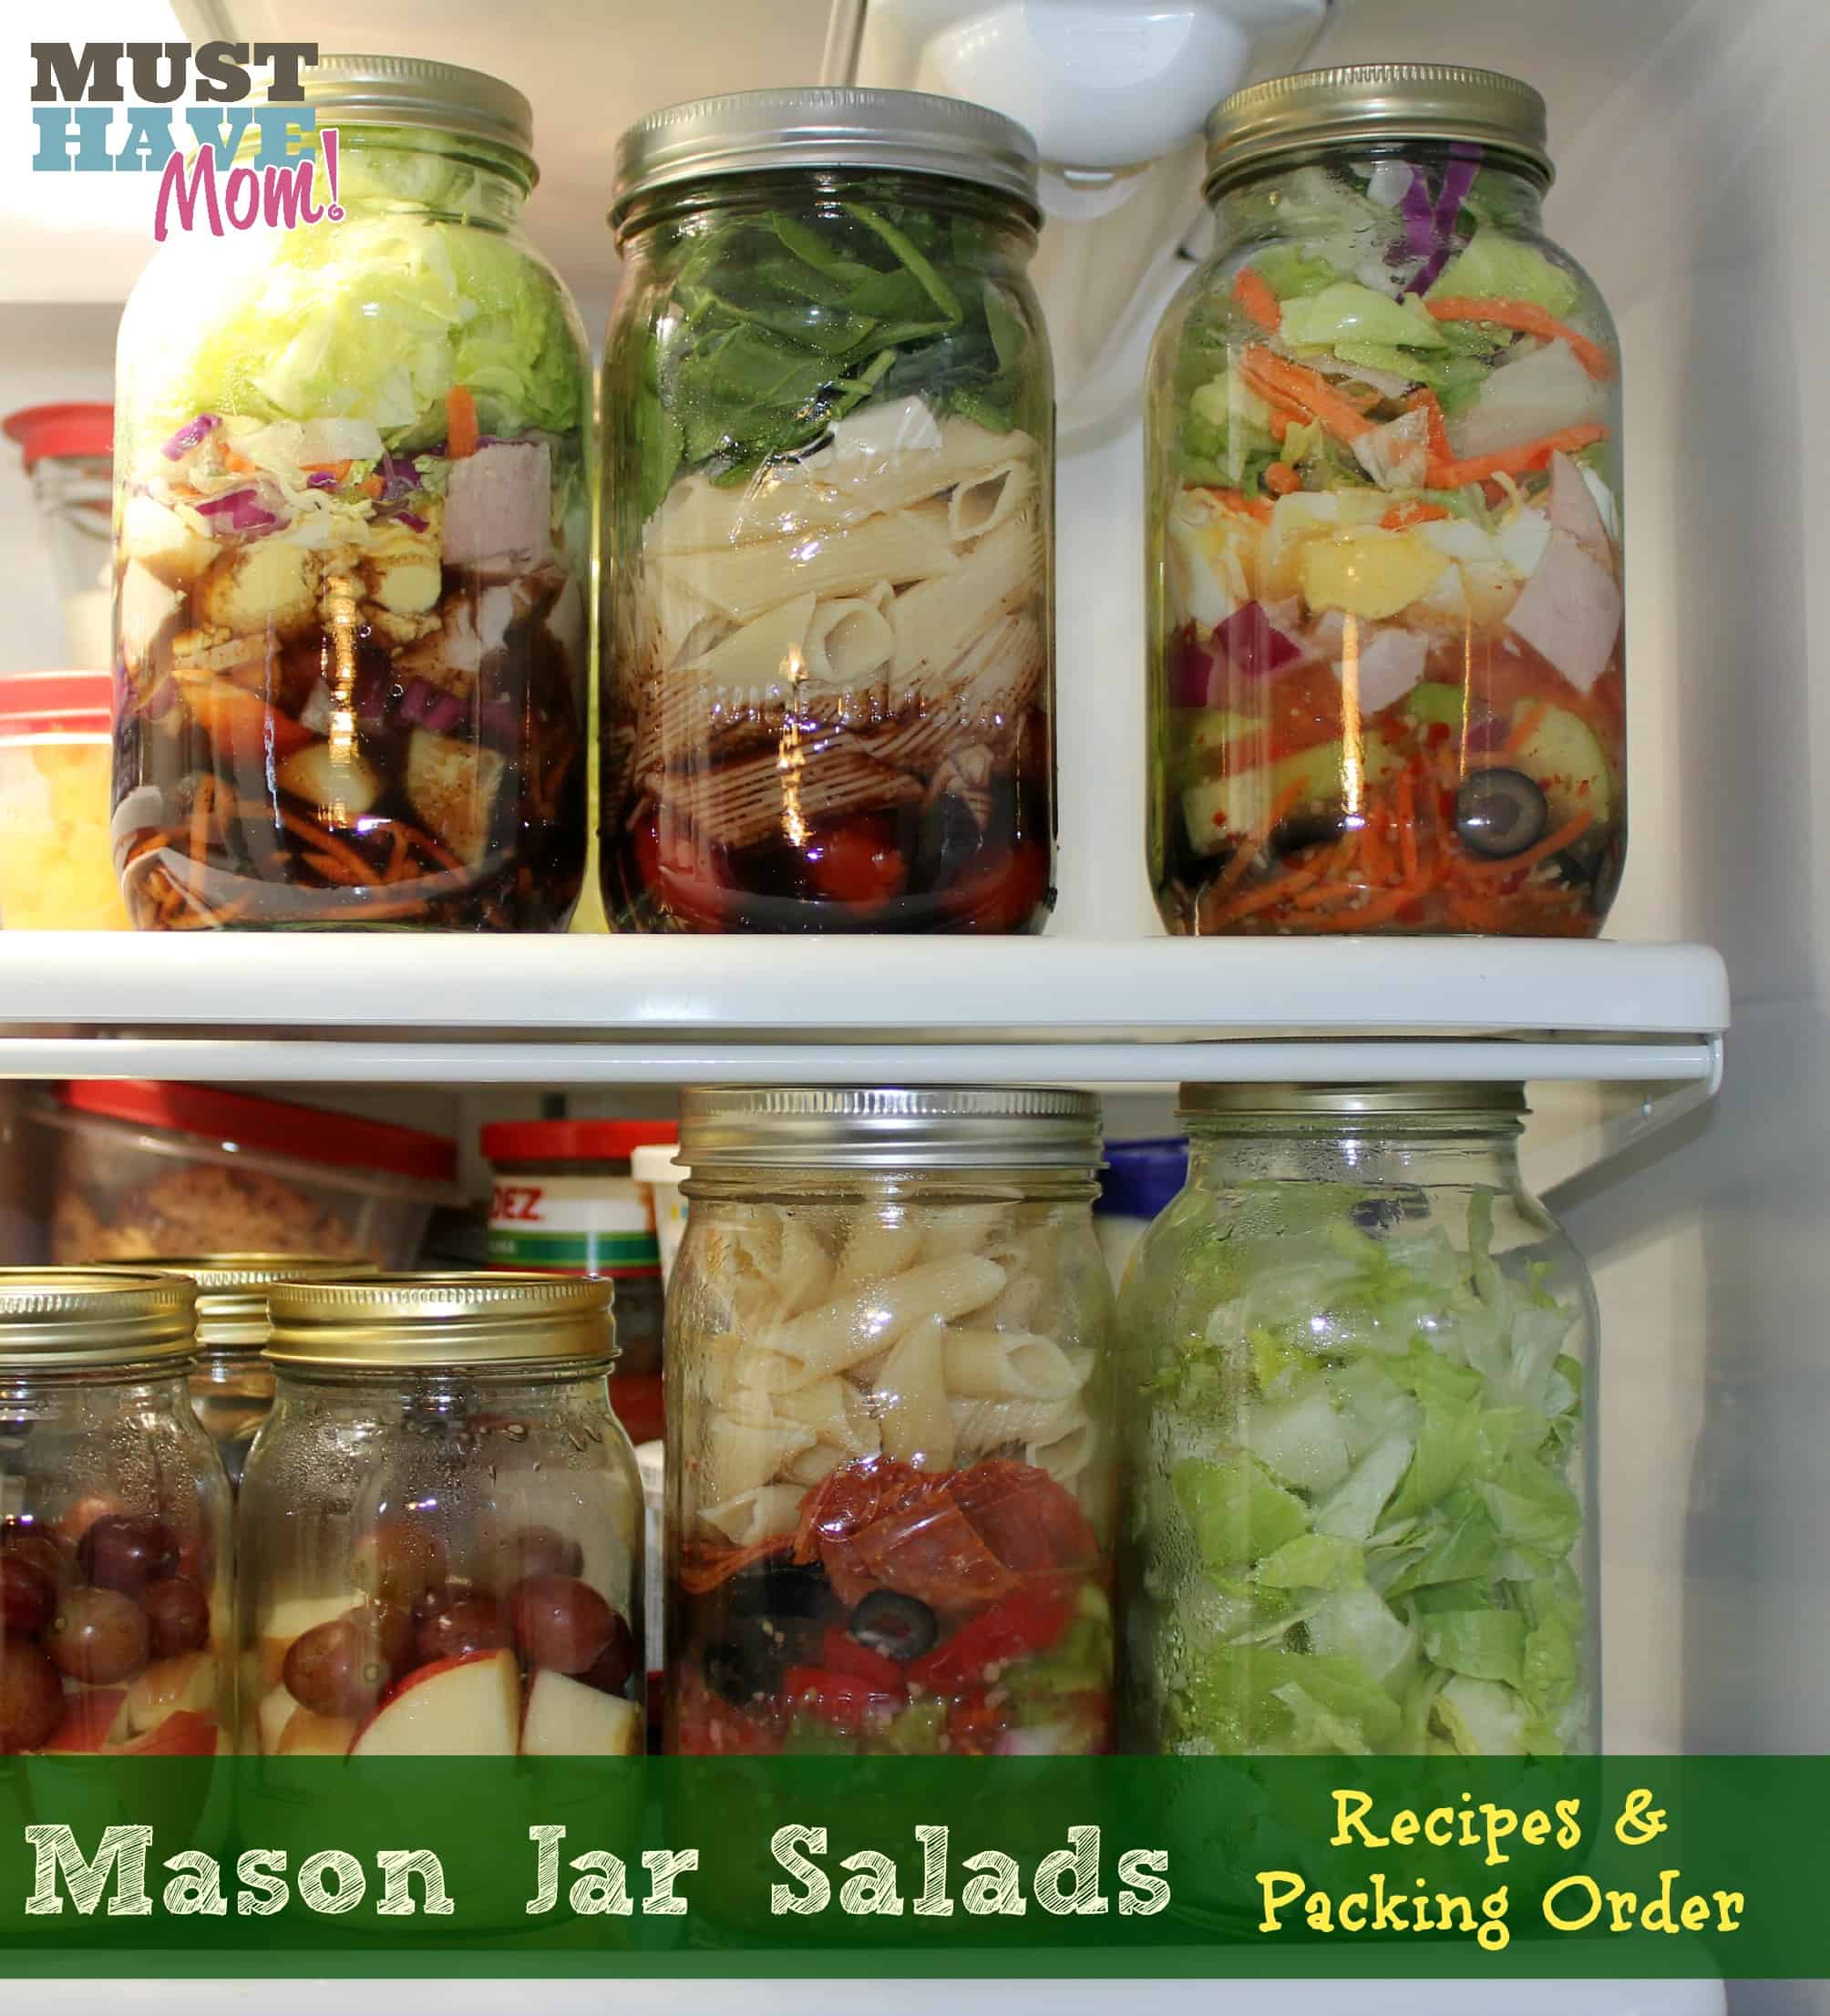 Mason Jar Salads With Recipes and Packing Order! Lunches that last a week in the fridge!